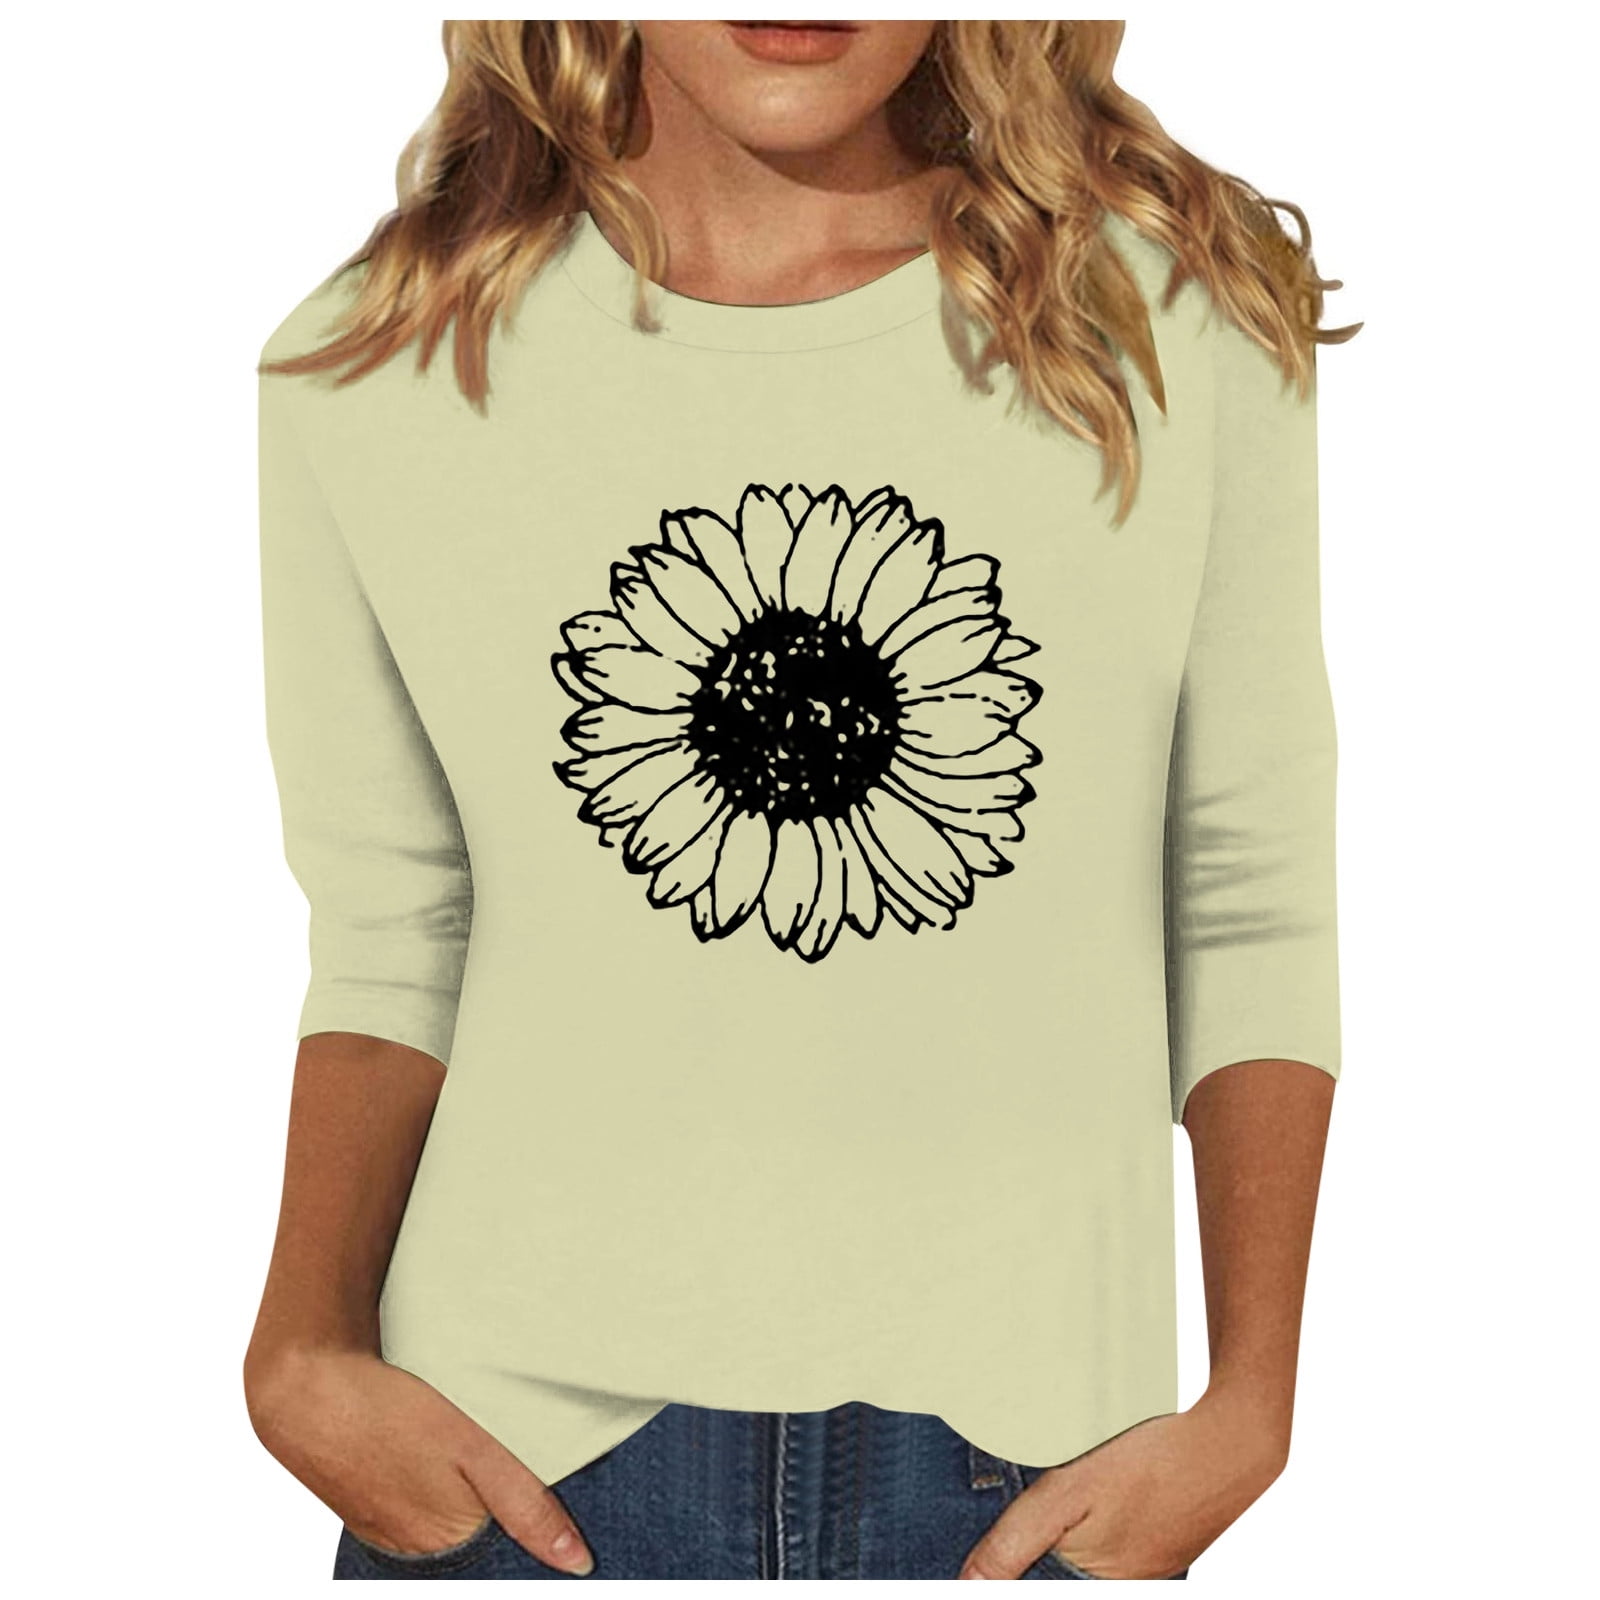 Womens Tops 3/4 Length Sleeves Scenery Graphic Blouses Long Sleeve ...